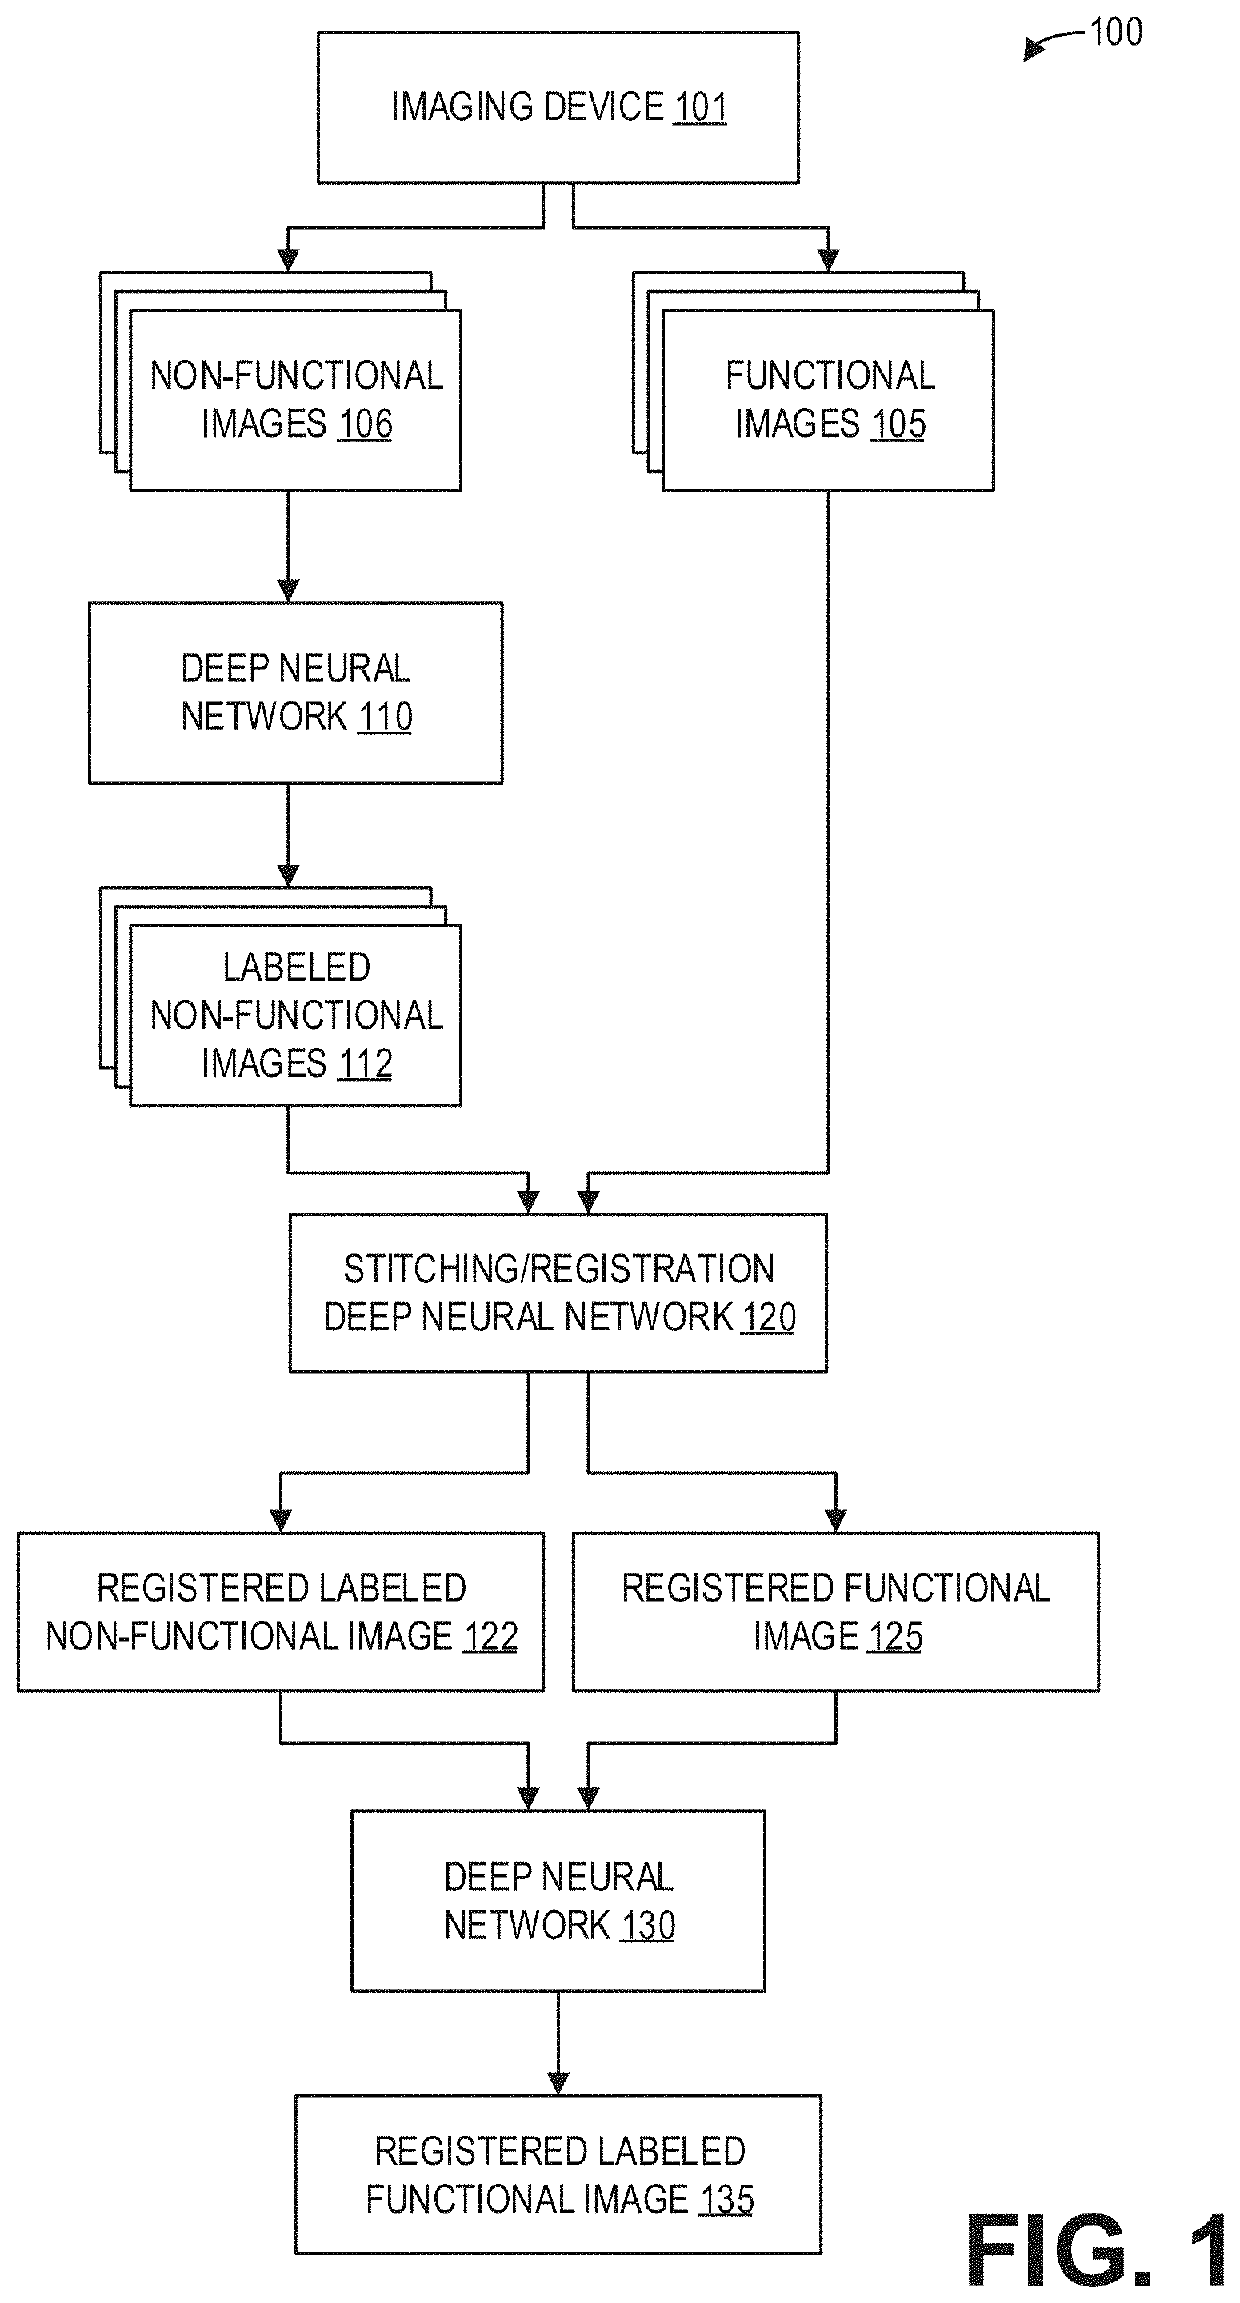 Systems and methods for deep learning based automated spine registration and label propagation